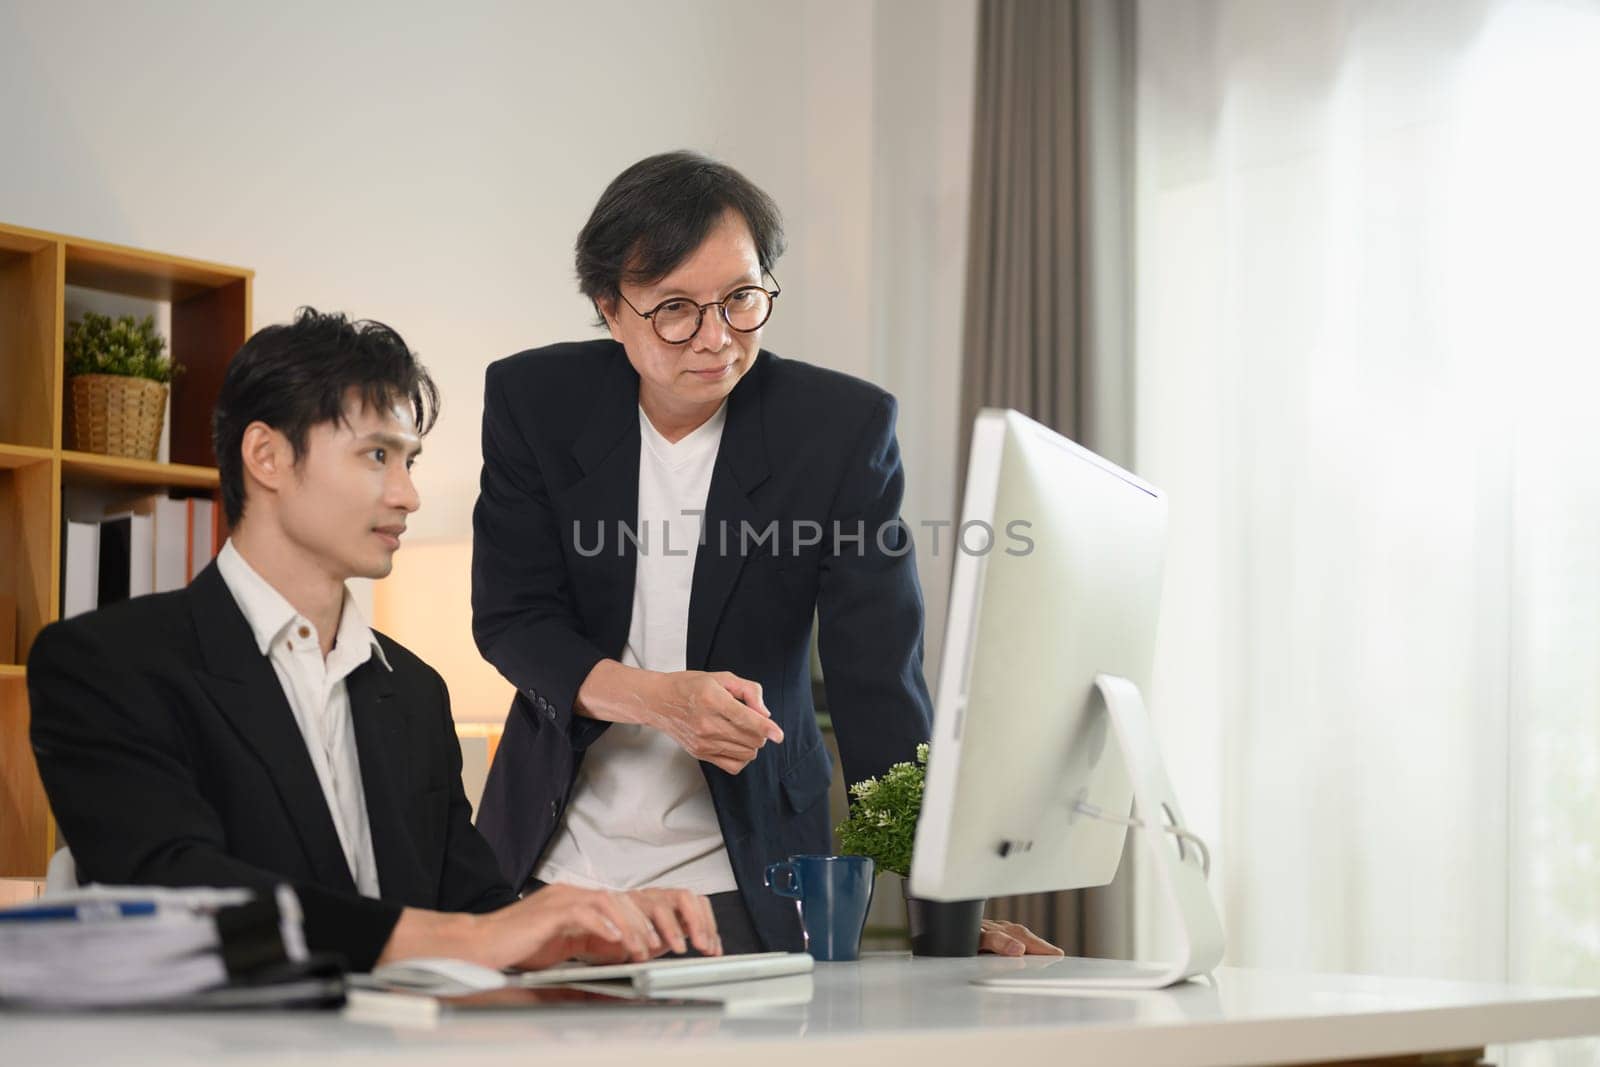 Confident middle age businessman explaining data on computer monitor to younger colleague.